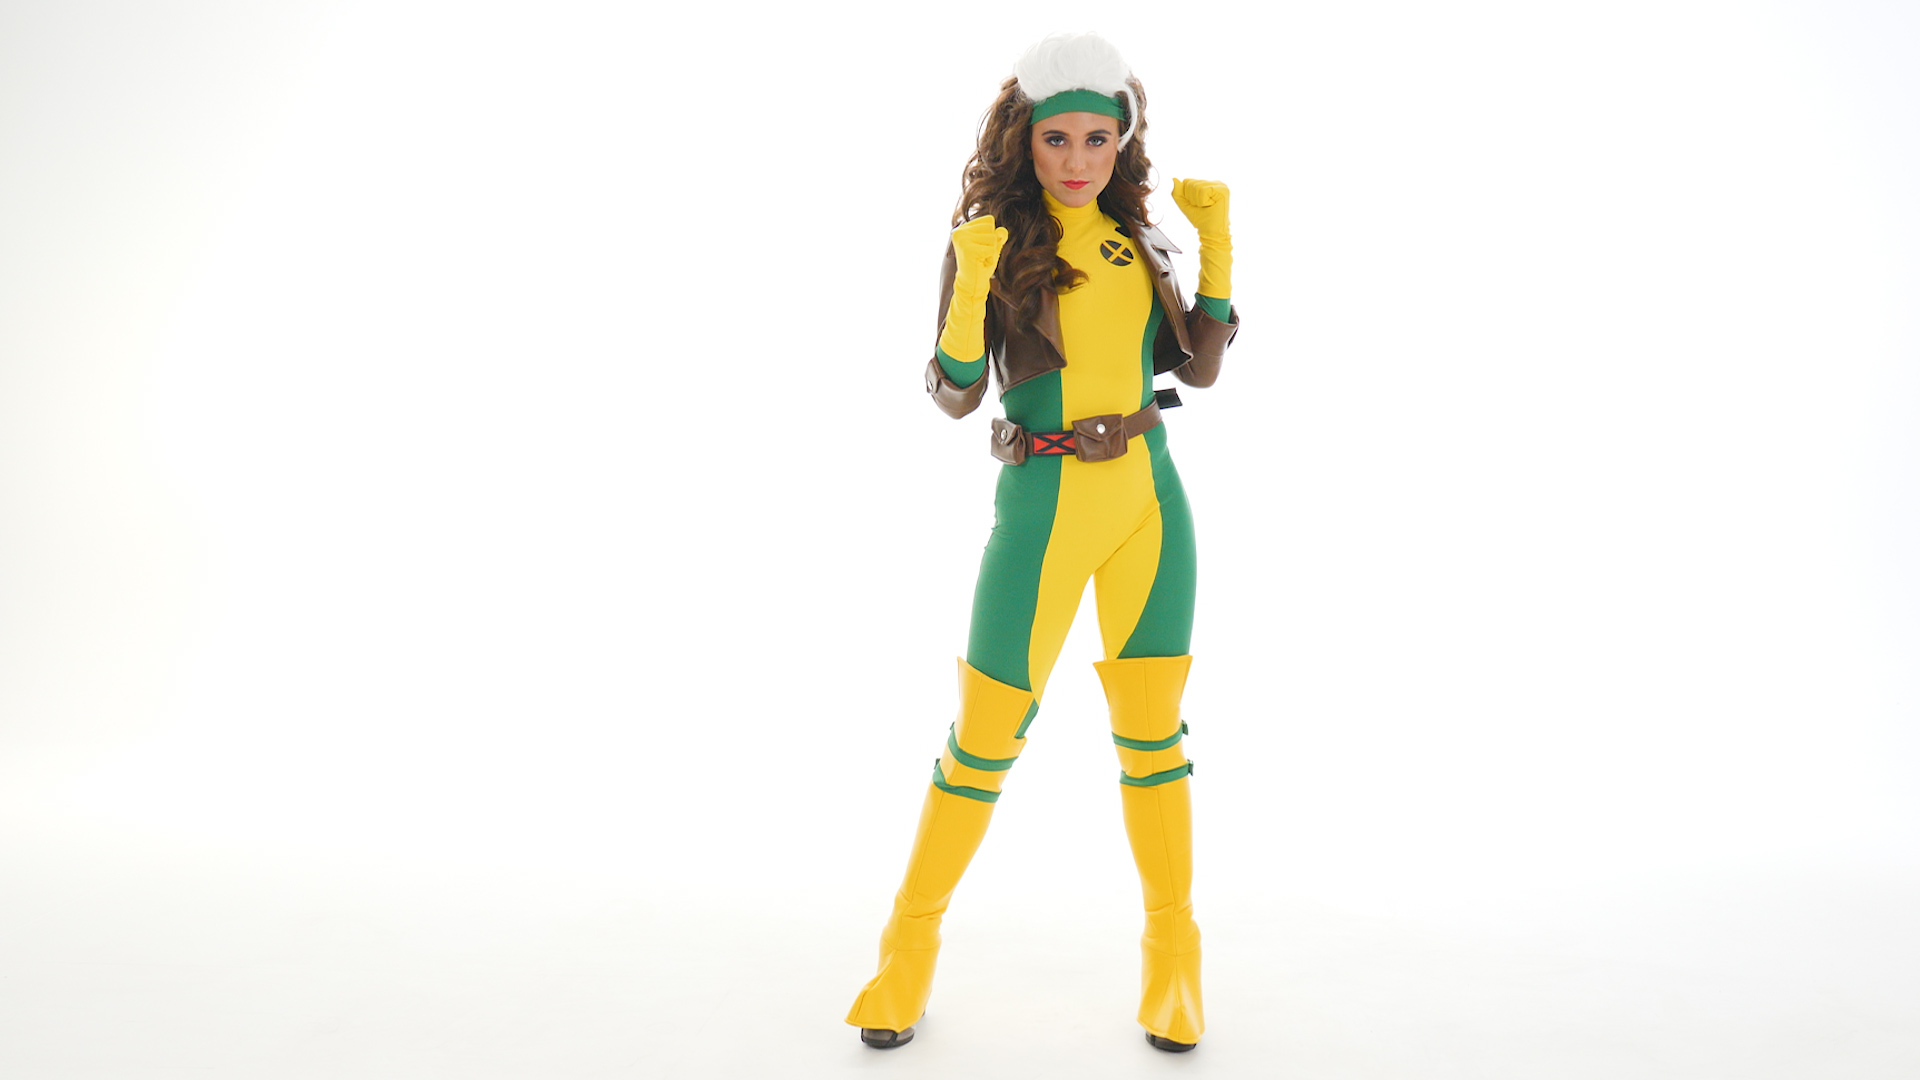 Stand out at your X-Men themed party with the X-Men Women's Rogue Premium Costume.